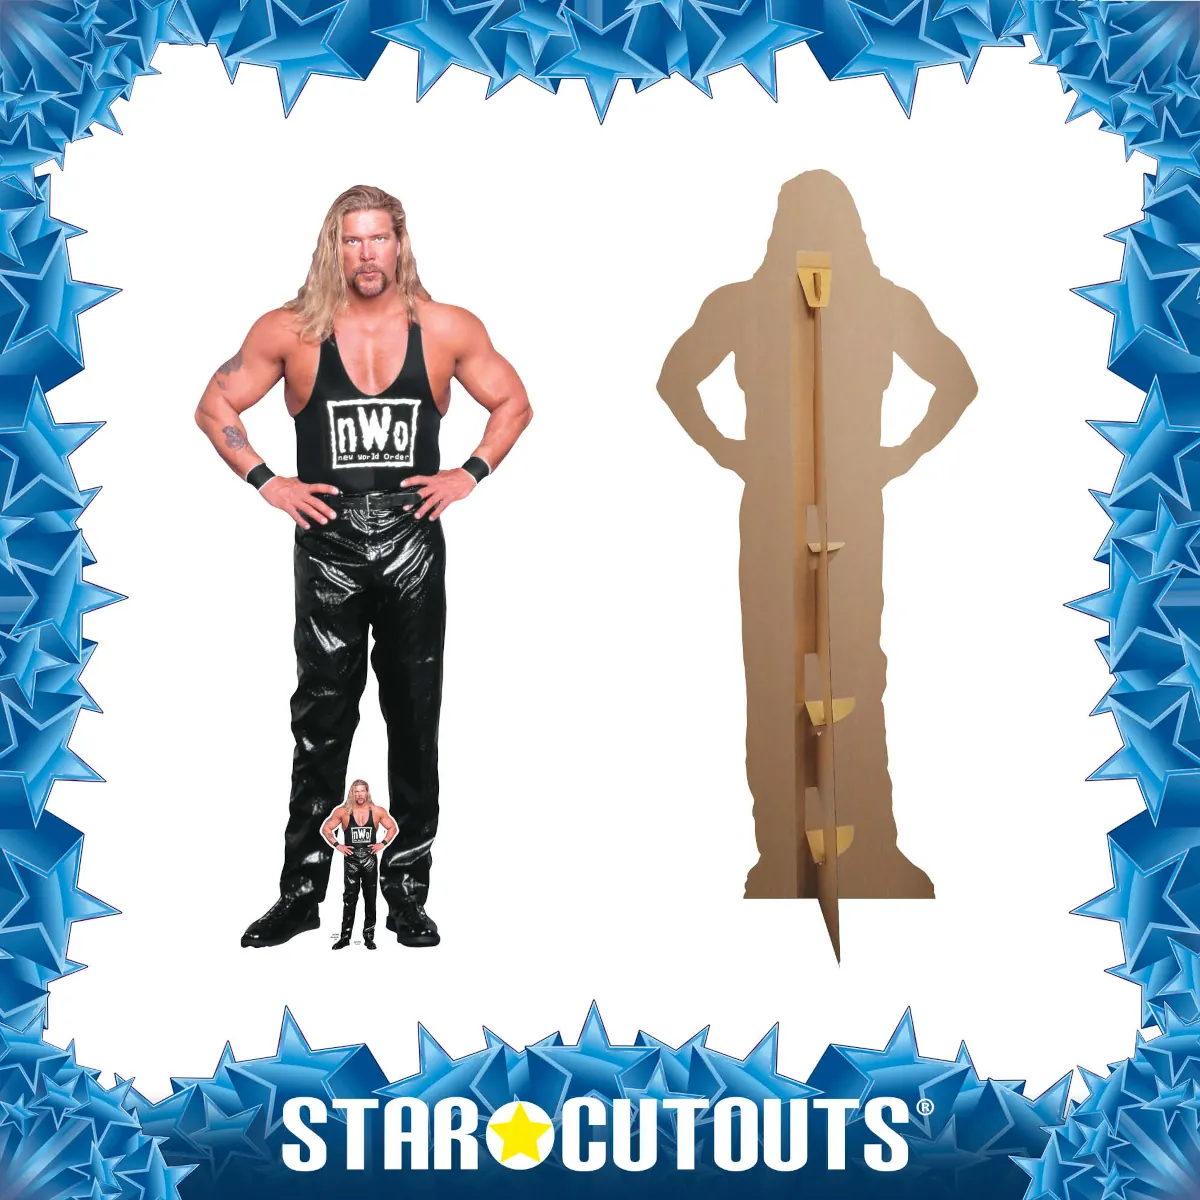 SC4413 Kevin Nash (WWE) Official Lifesize + Mini Cardboard Cutout Standee Frame